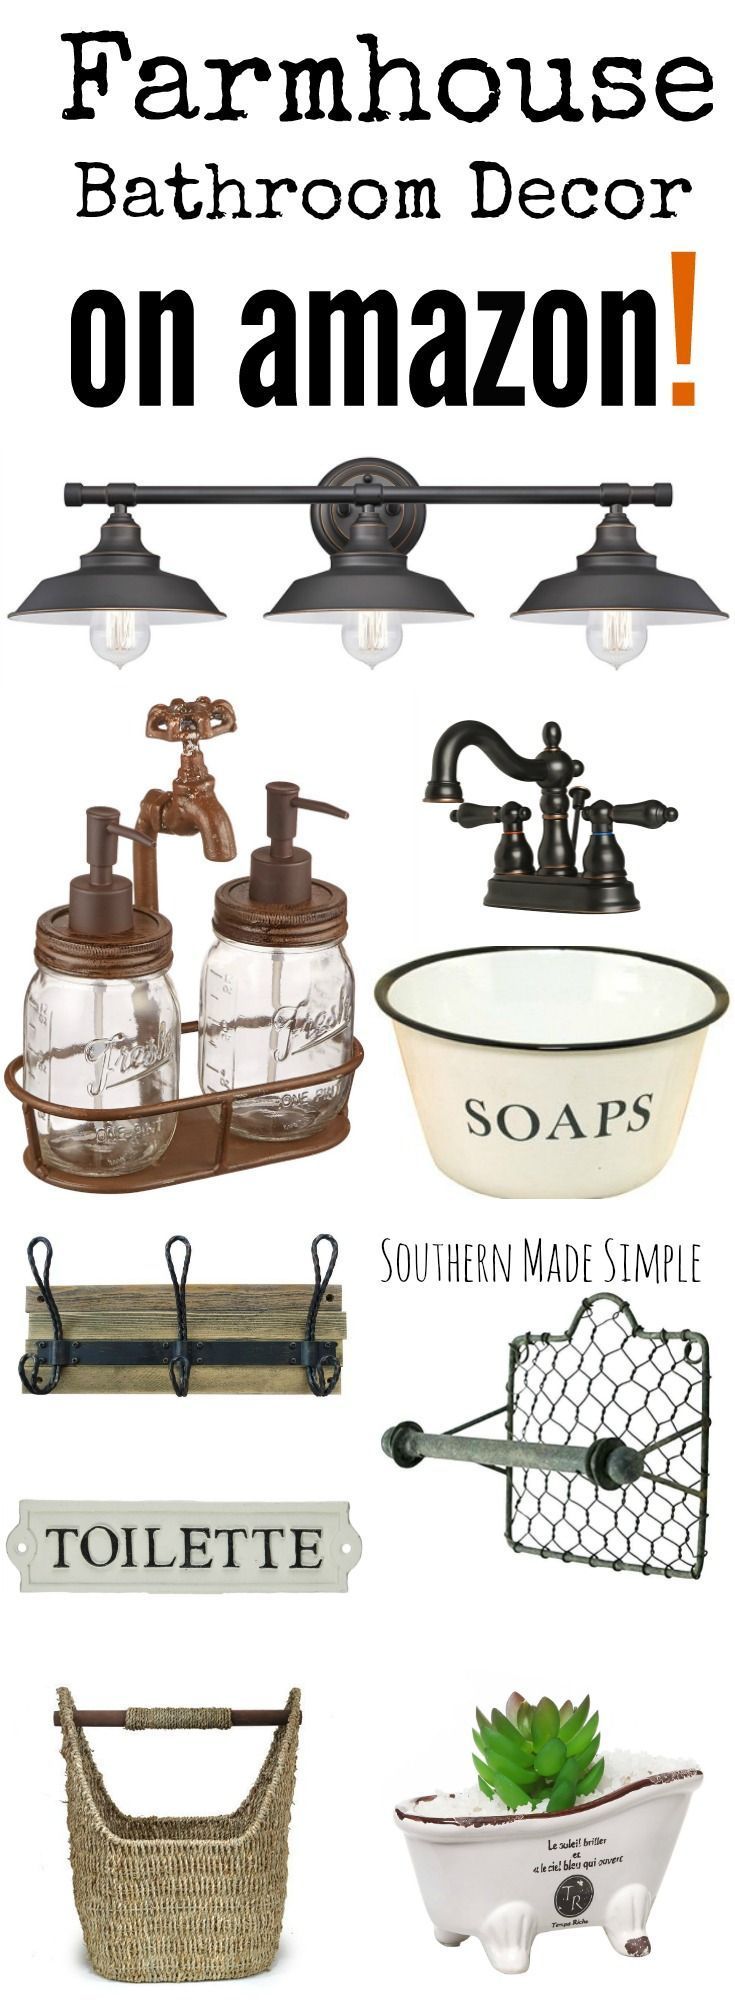 The BEST collection of Farmhouse style decor to spruce up your bathroom, and its all available on Amazon! Hello, 2 day shipping!